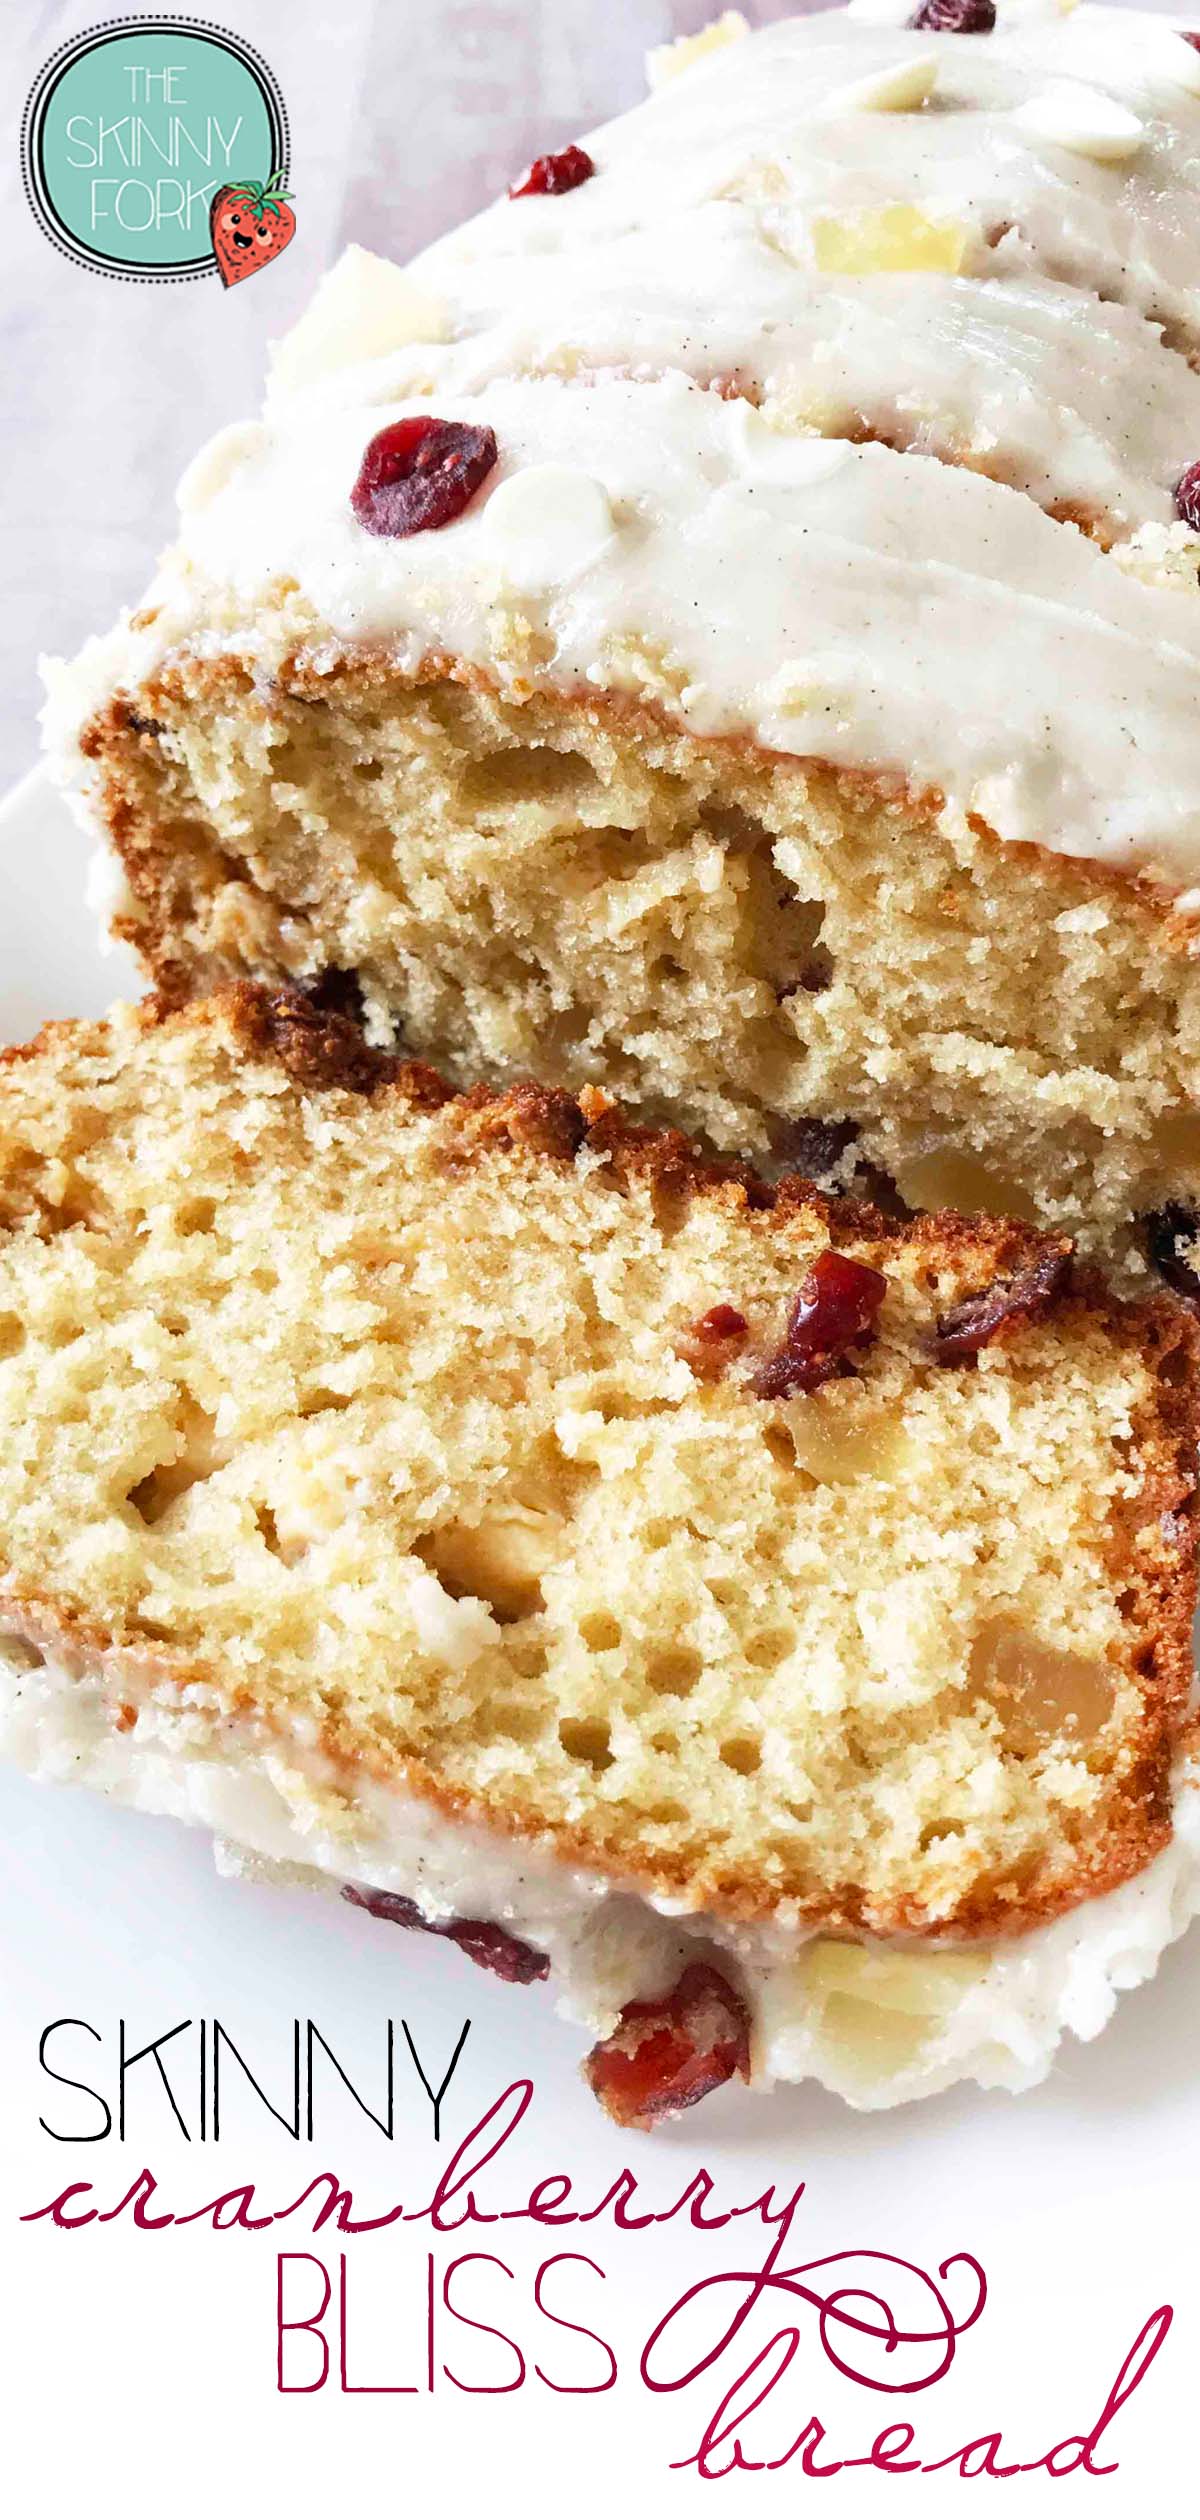 Skinny Cranberry Bliss Bread